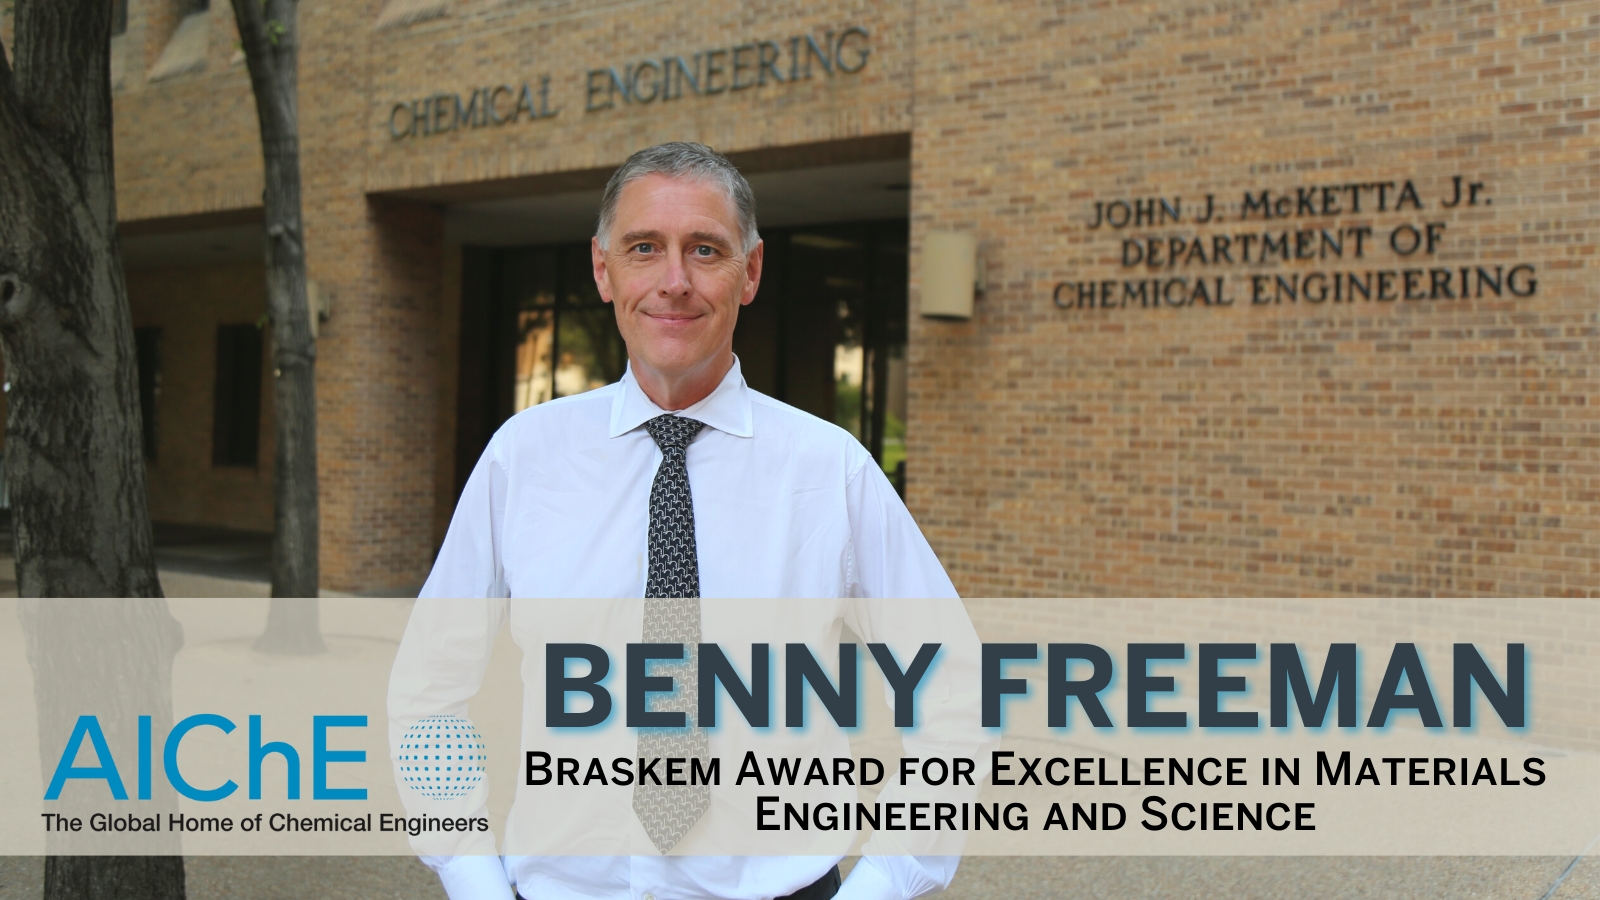 Benny Freeman awarded Braskem Award for outstanding contributions in his field